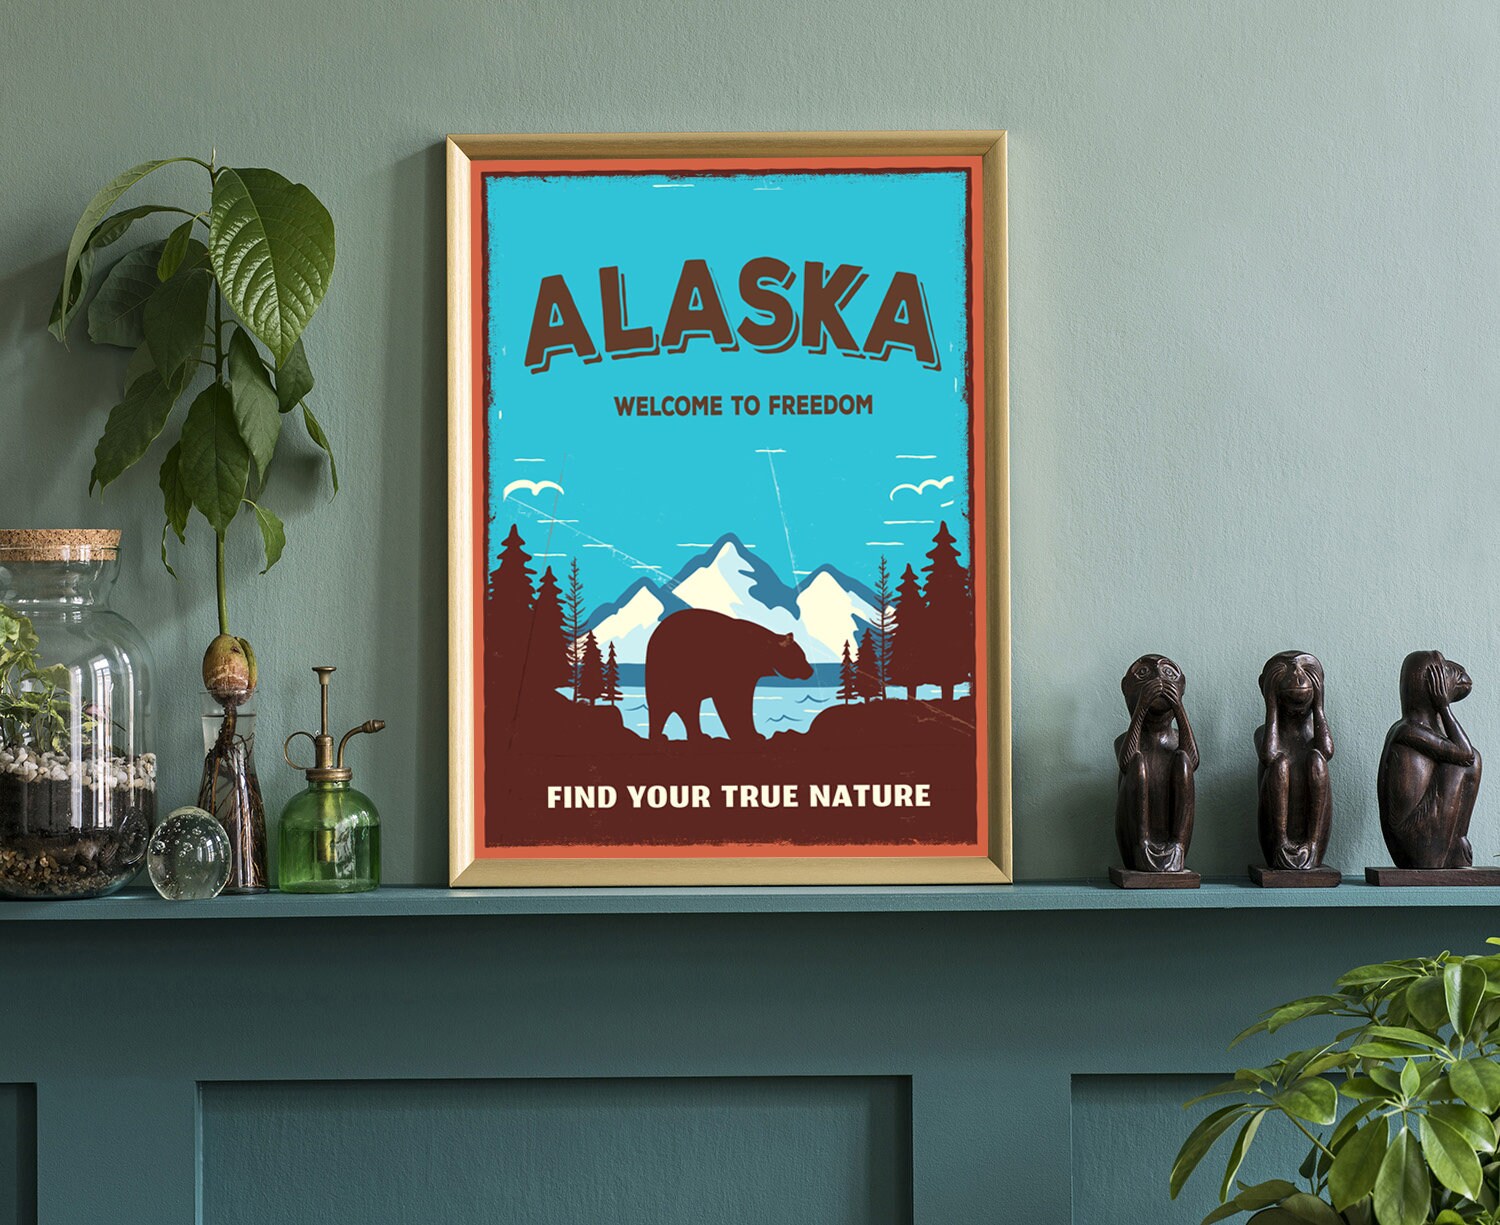 Retro Style Travel Poster, Alaska Vintage Rustic Poster Print, Home Wall Art, Office Wall Decor, Posters, Alaska, State Map Poster Printing